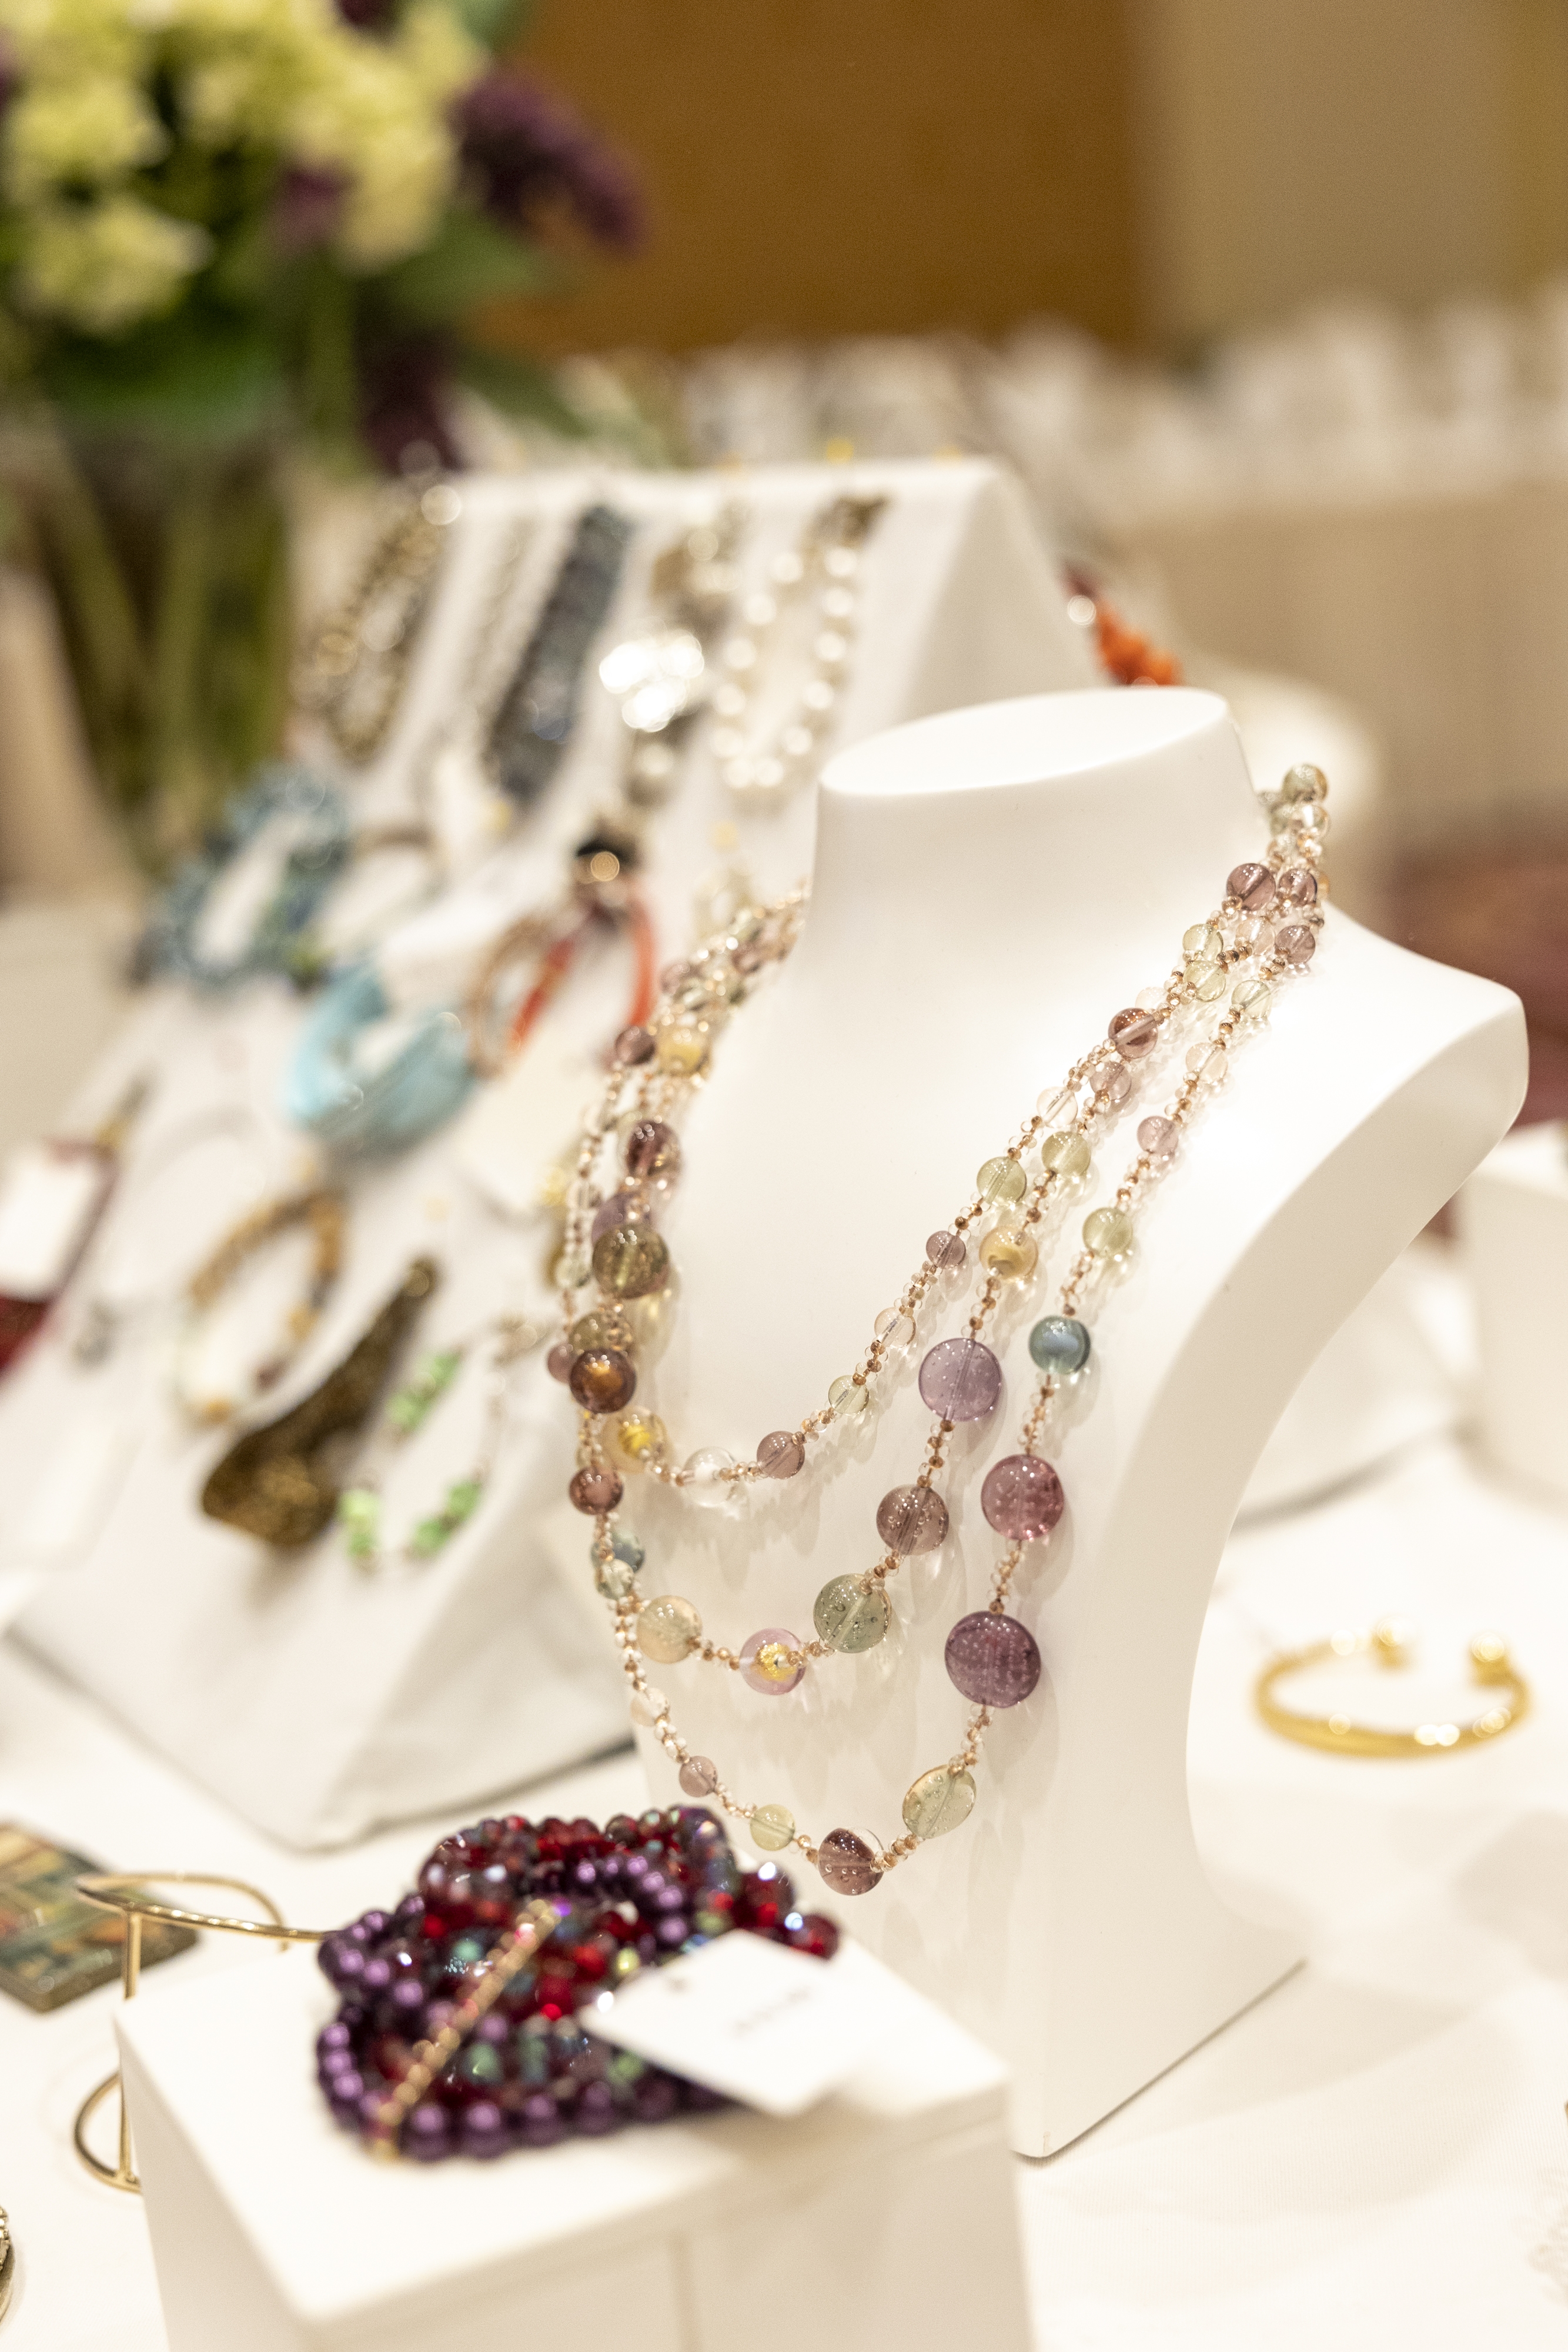 The Children's Center Utah's Annual Jewelry Luncheon is back in 2022